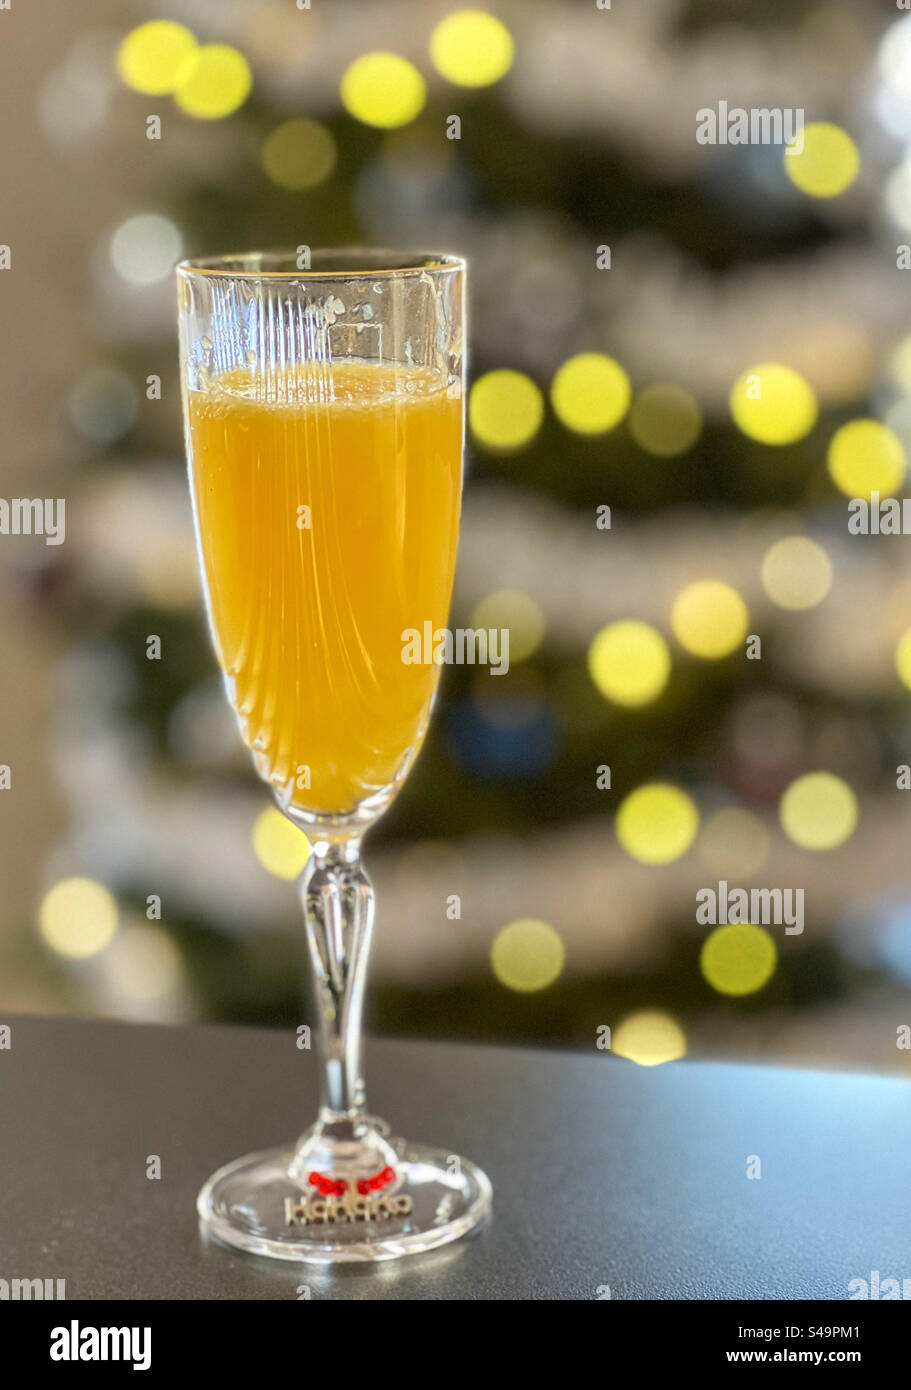 Champagne glass with Bucks Fizz or mimosa cocktail, with Christmas tree lights bokeh in background. Stock Photo